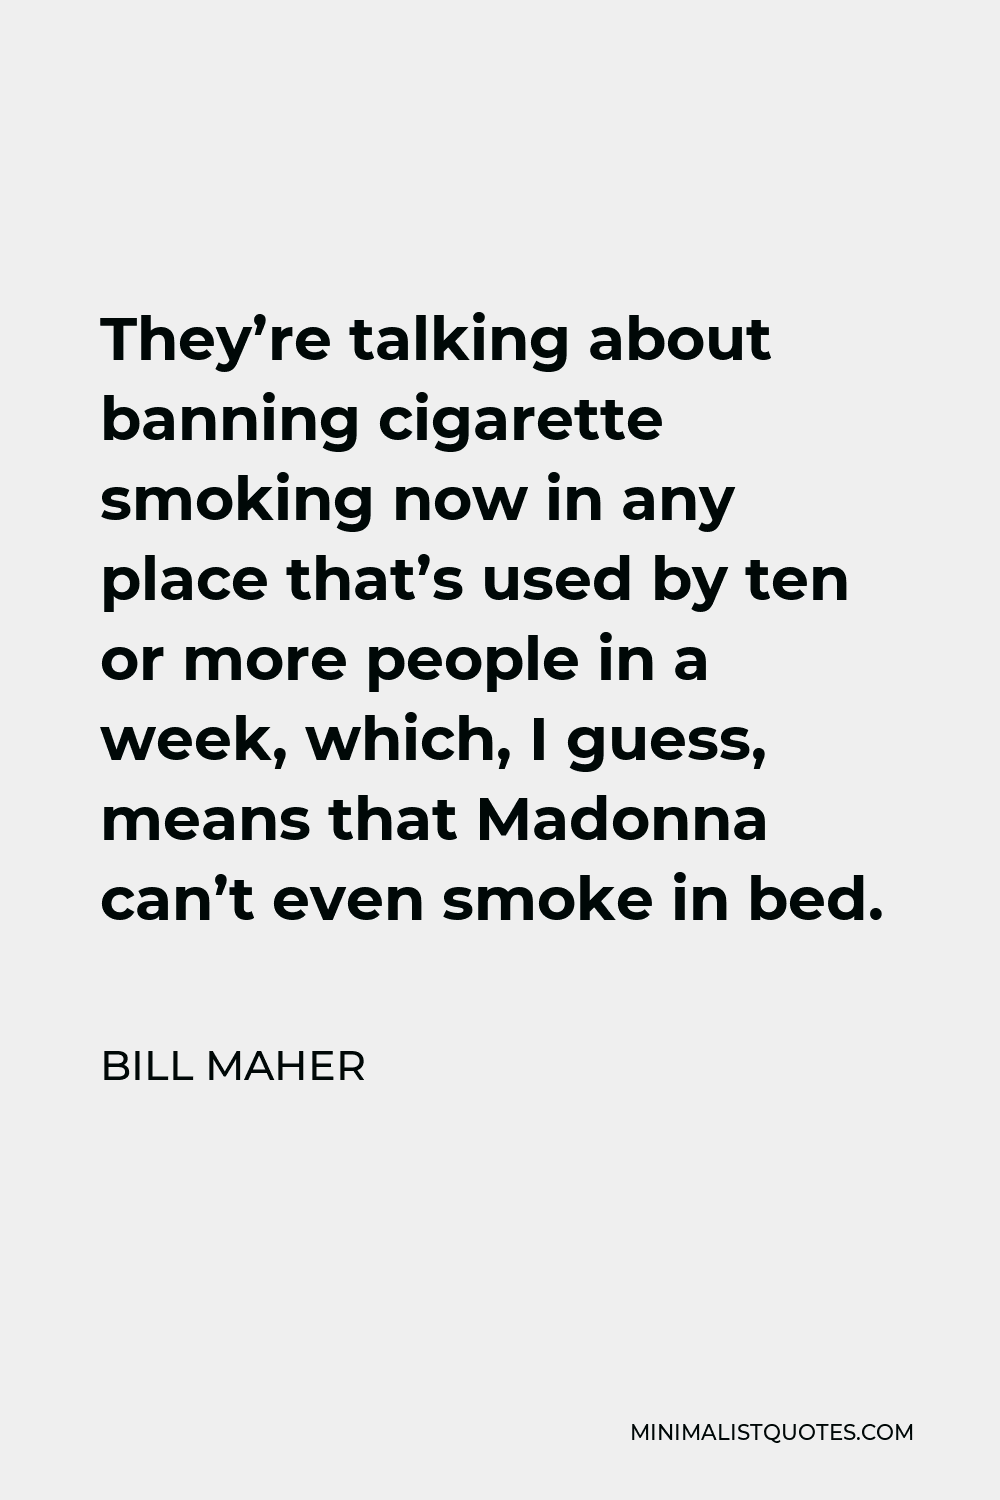 Bill Maher Quote - They’re talking about banning cigarette smoking now in any place that’s used by ten or more people in a week, which, I guess, means that Madonna can’t even smoke in bed.